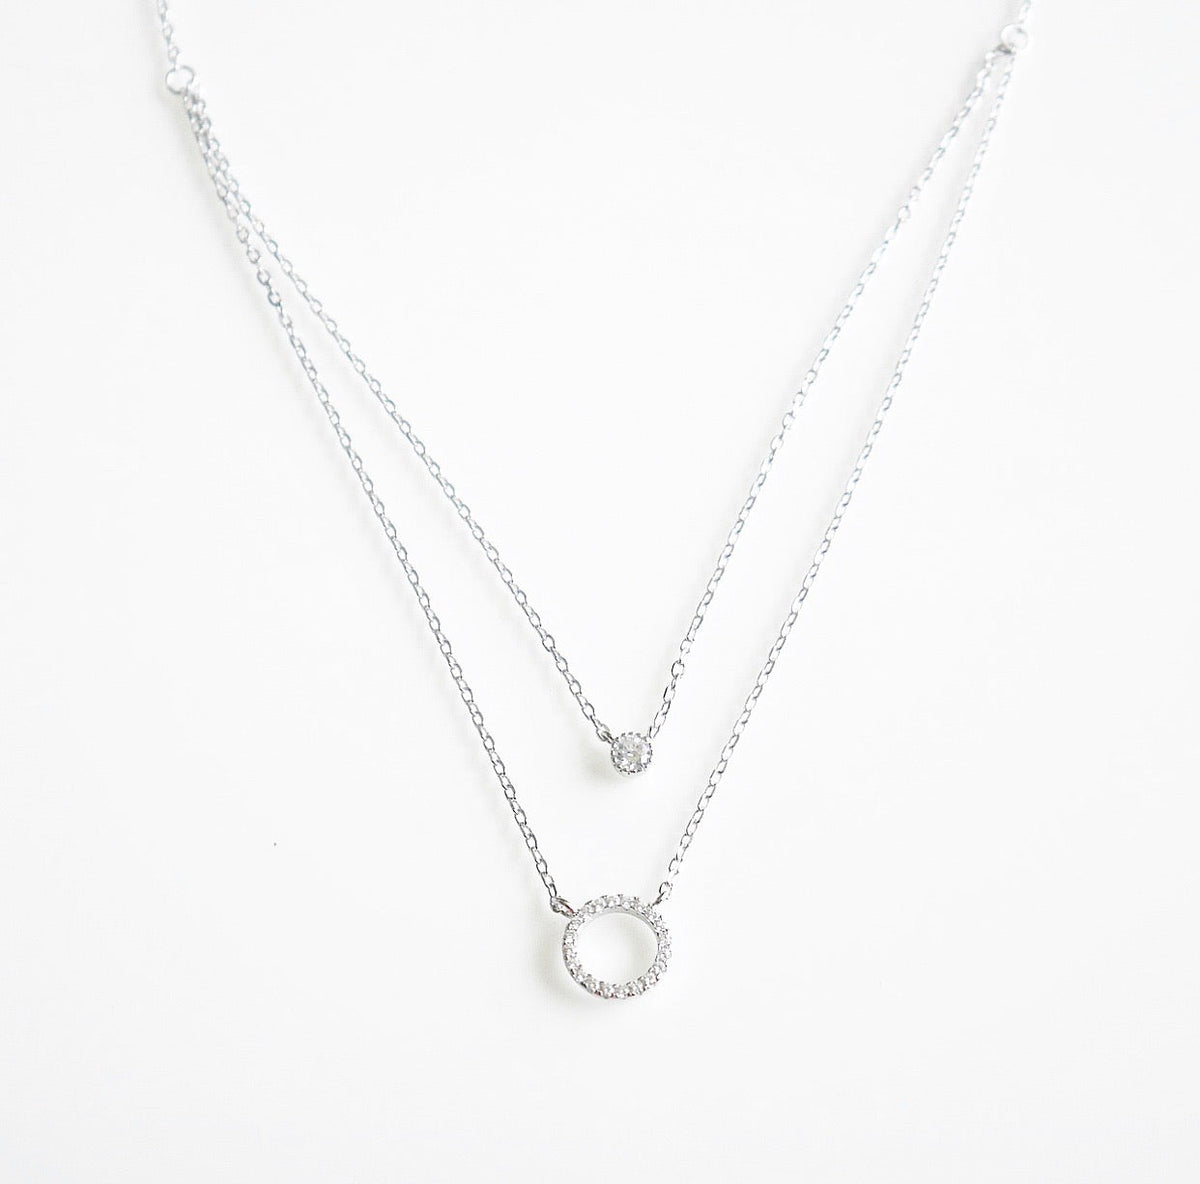 layered necklaces diamond zircon .925 sterling silver , circle necklace for everyday, work necklaces wont tarnish or turn green. Everyday jewelry. Gift ideas jewelry store Miami, things to do in Miami Kesley Boutique